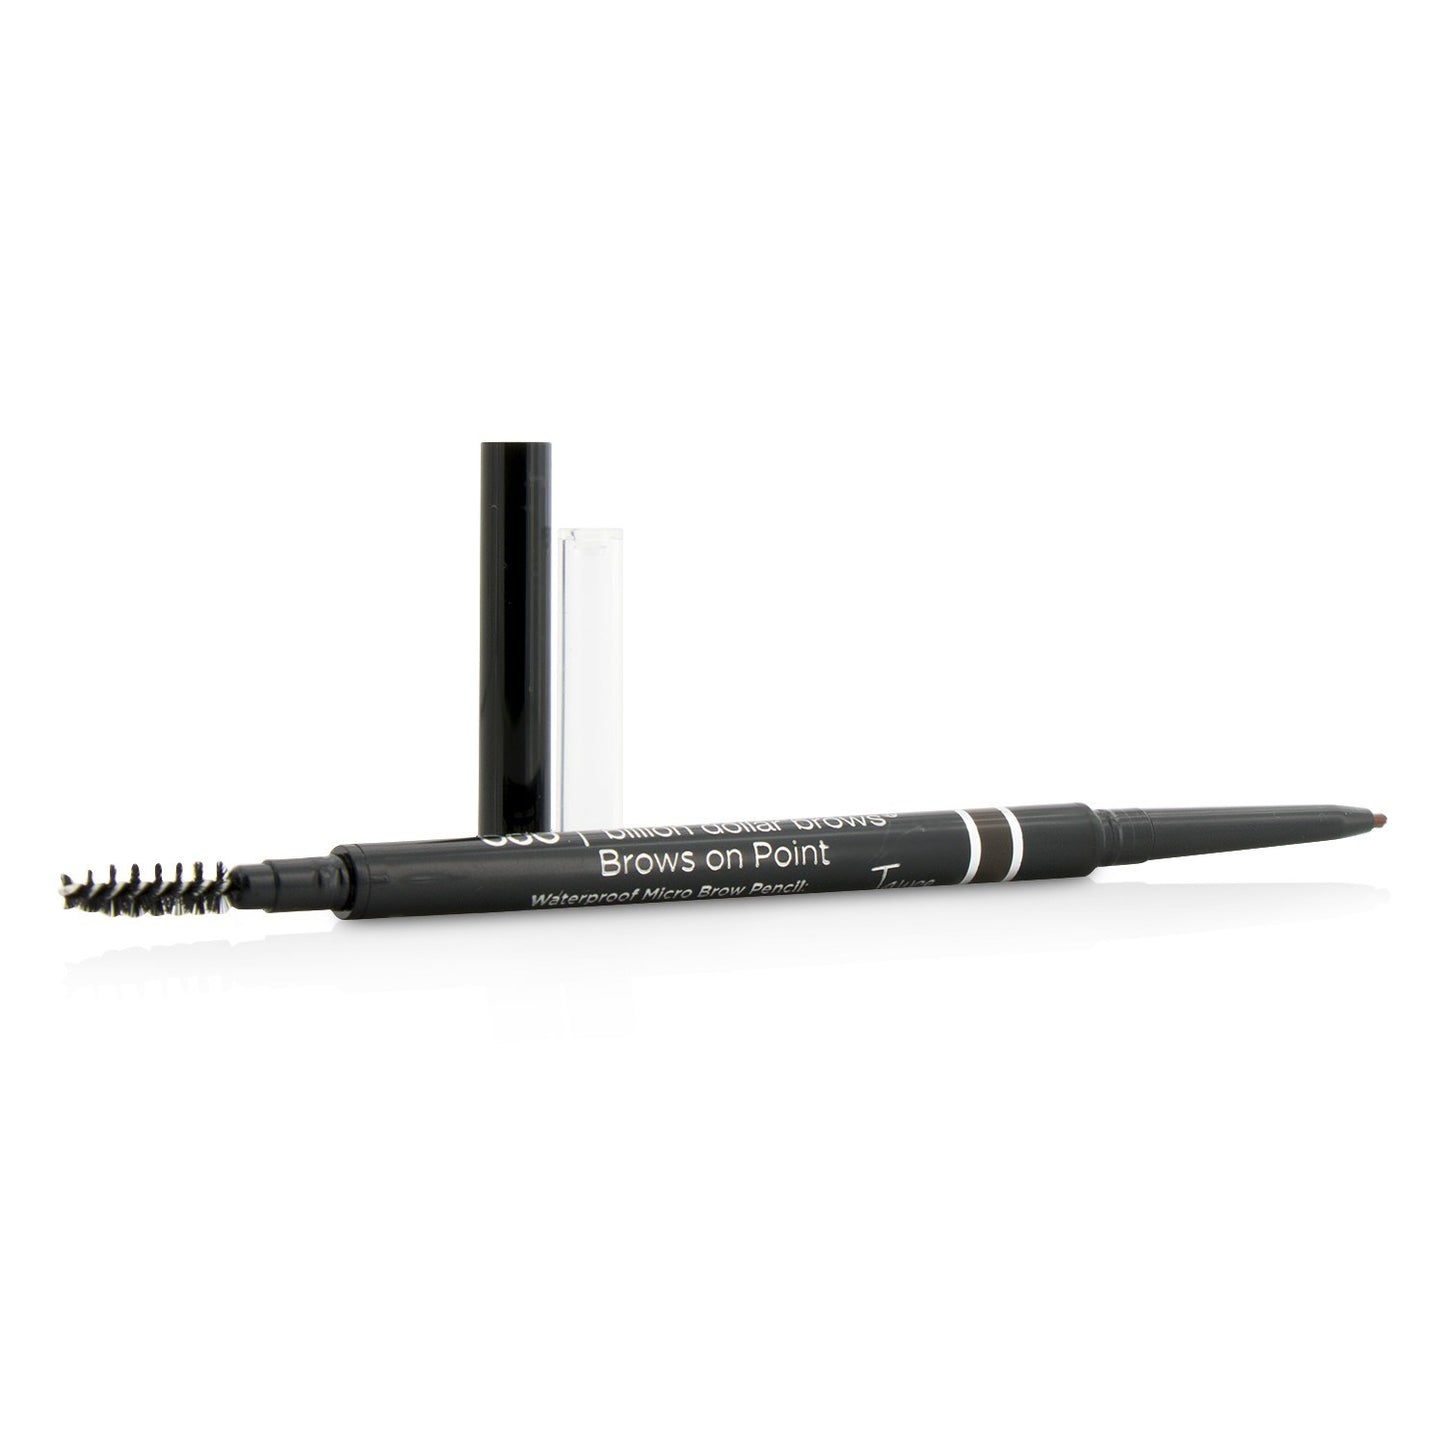 BILLION DOLLAR BROWS - Brows On Point Waterproof Micro Brow Pencil - Taupe 311429 0.045g/0.002oz